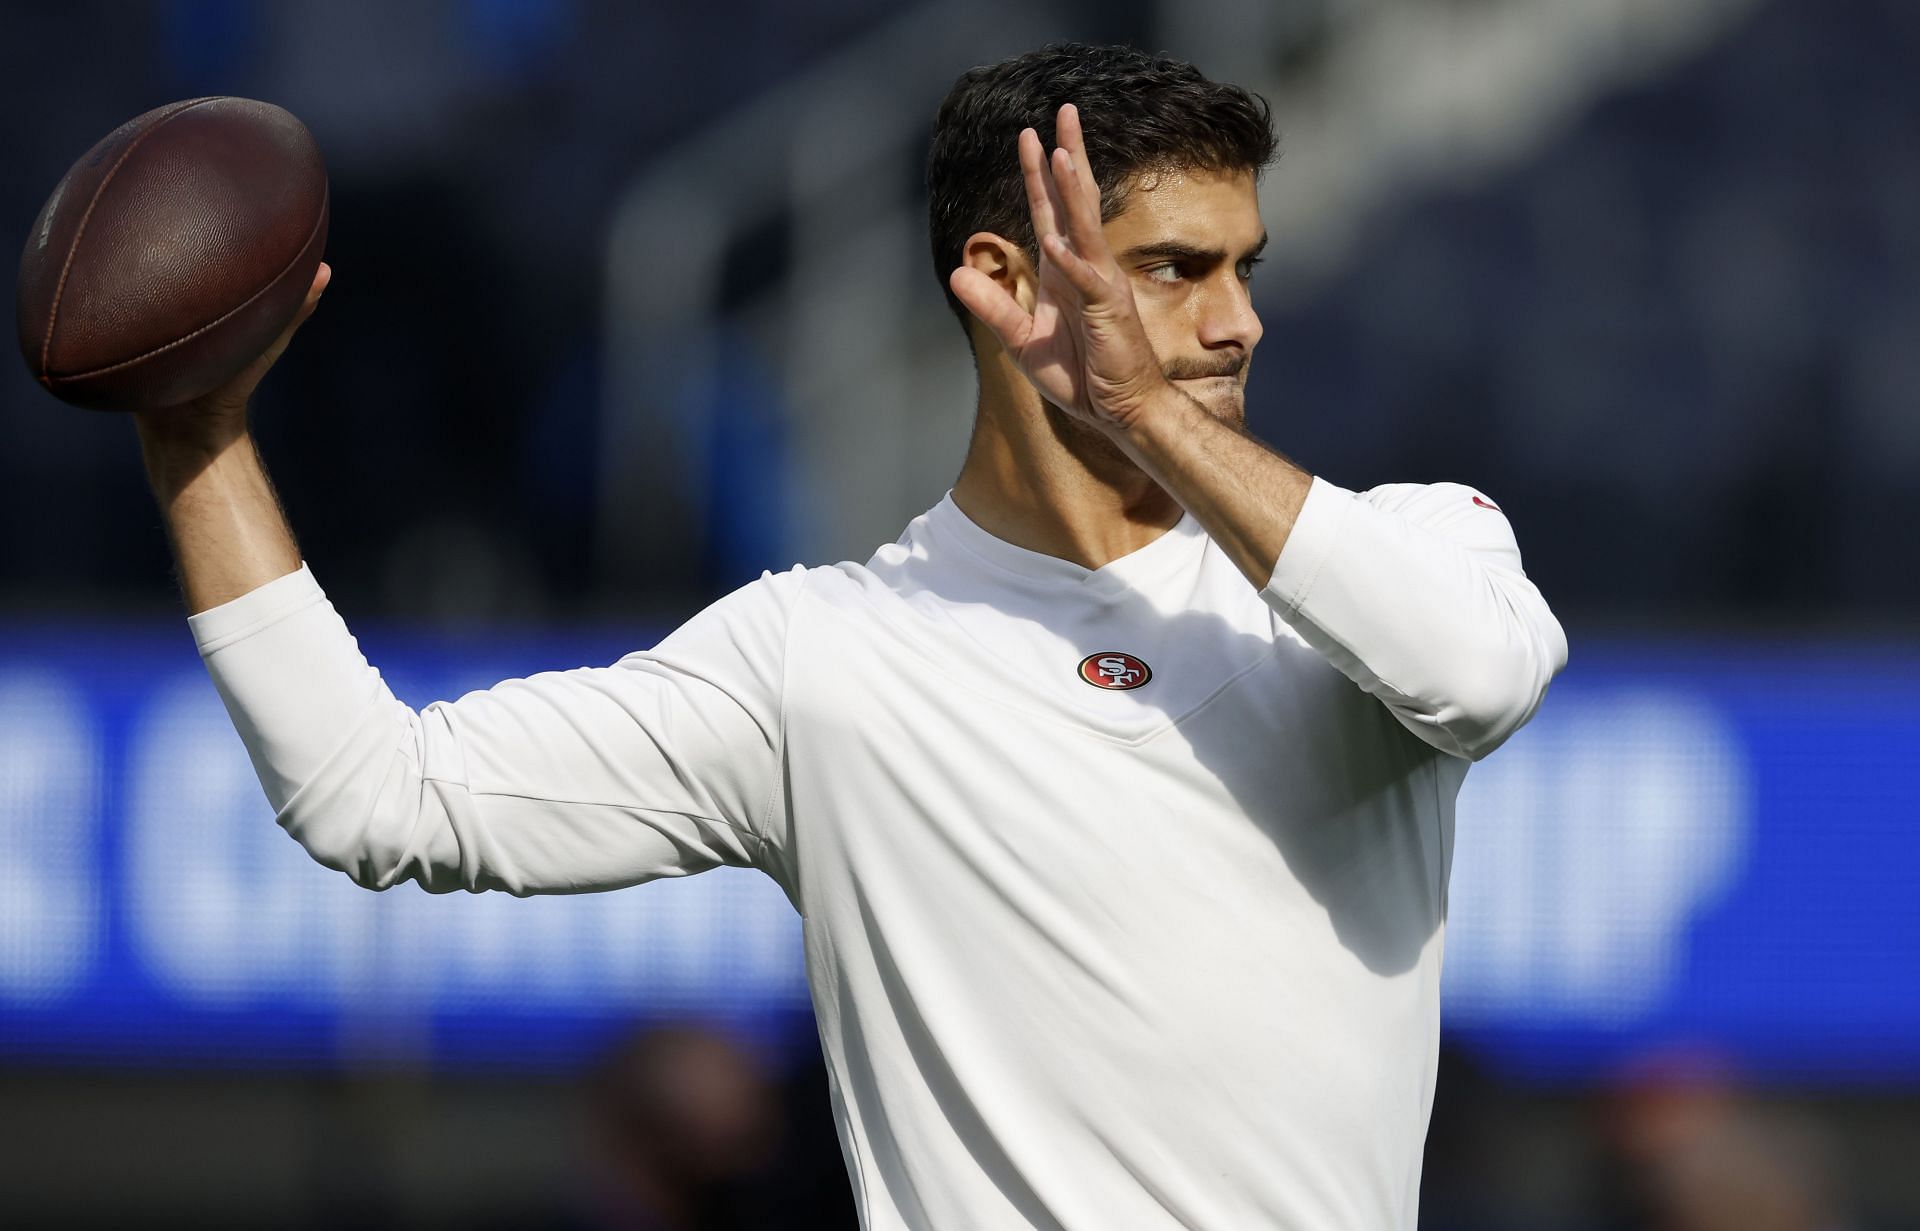 Could the New York Giants be a good fit for San Francisco 49ers quarterback Jimmy Garoppolo?